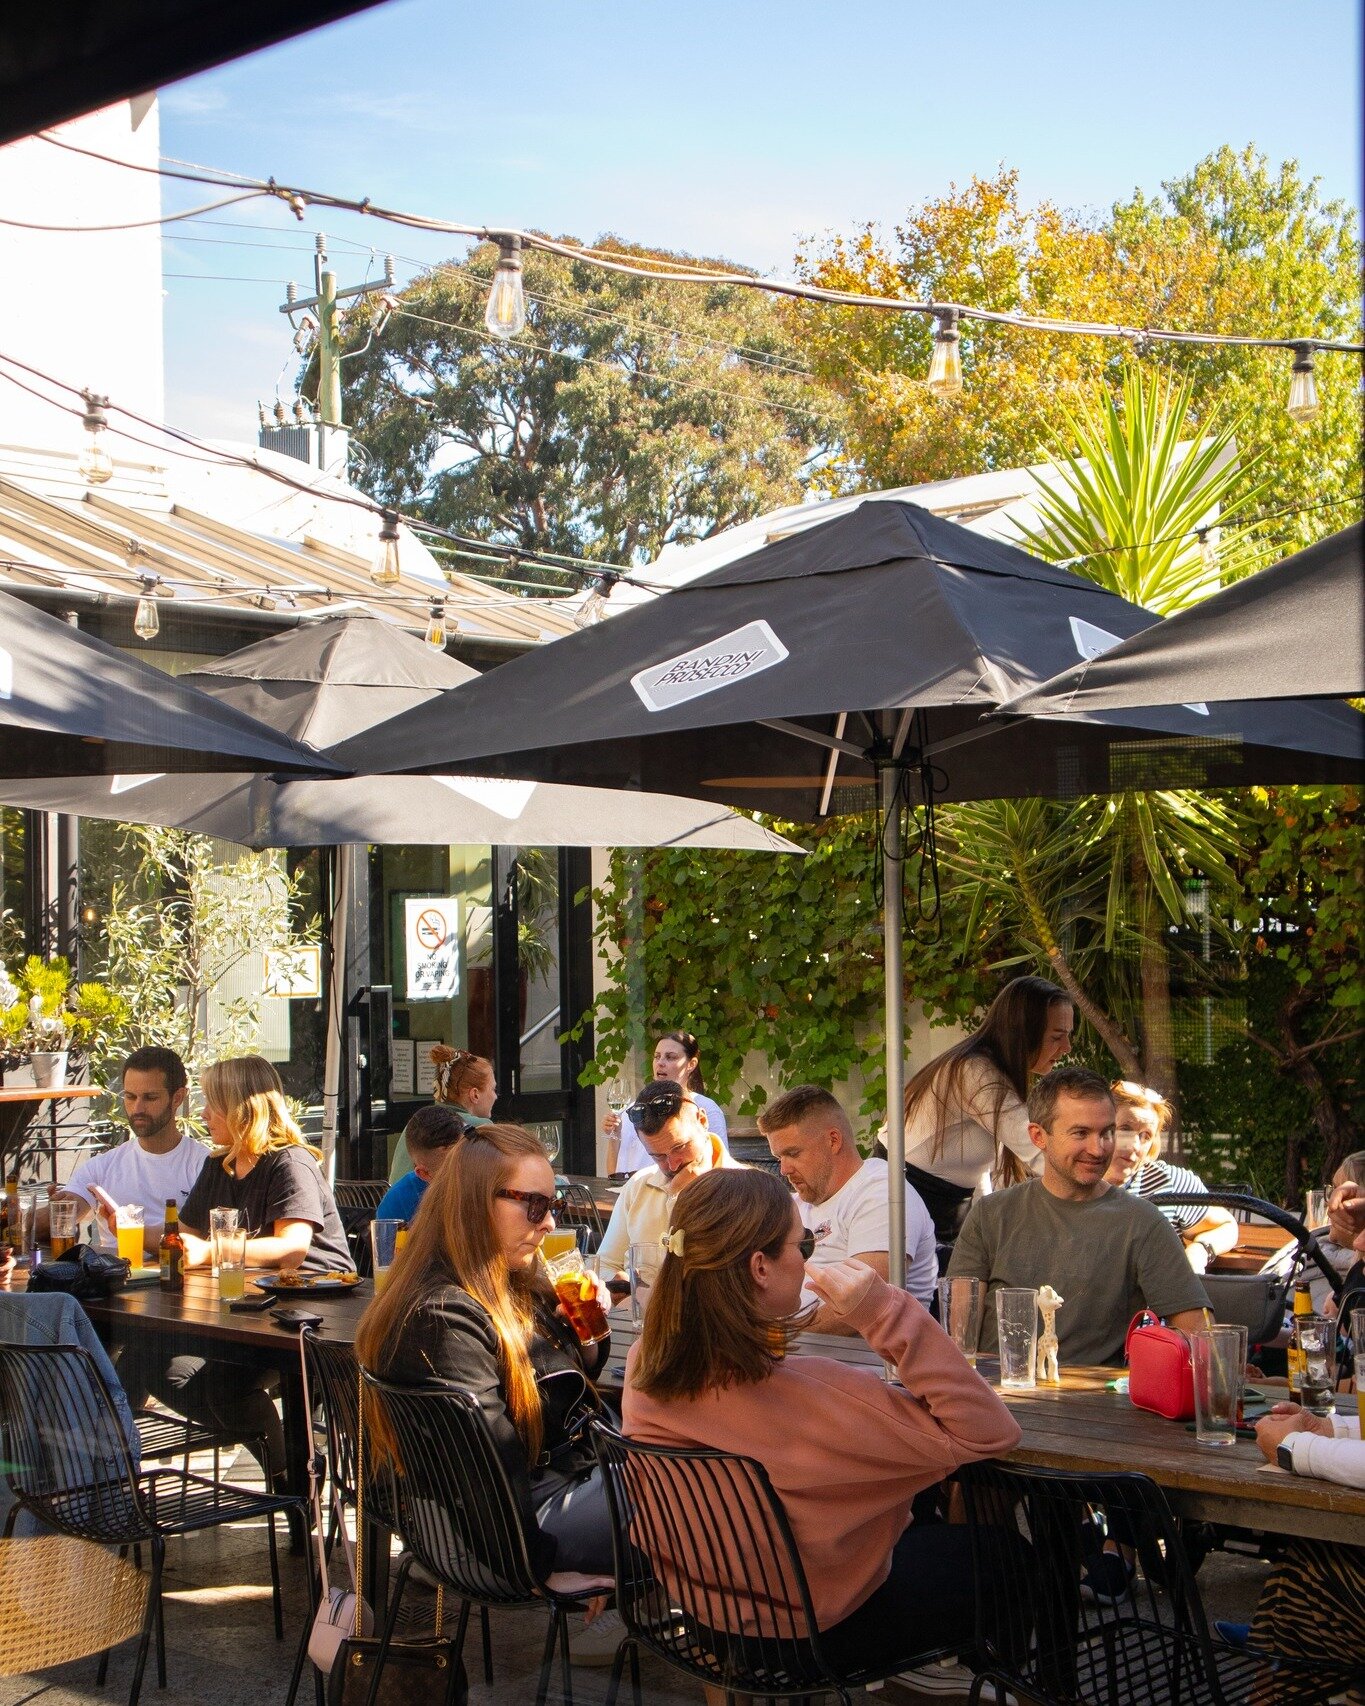 Come and enjoy the atmosphere. We'll have the footy live and loud in our courtyard!

#weekendvibes #foodlover #whatsonmelb #delicious #foodie #instafood #yummy #tasty #friends #partytime #wine #cocktails #cheers #visitmelbourne #melbournefood #melbou